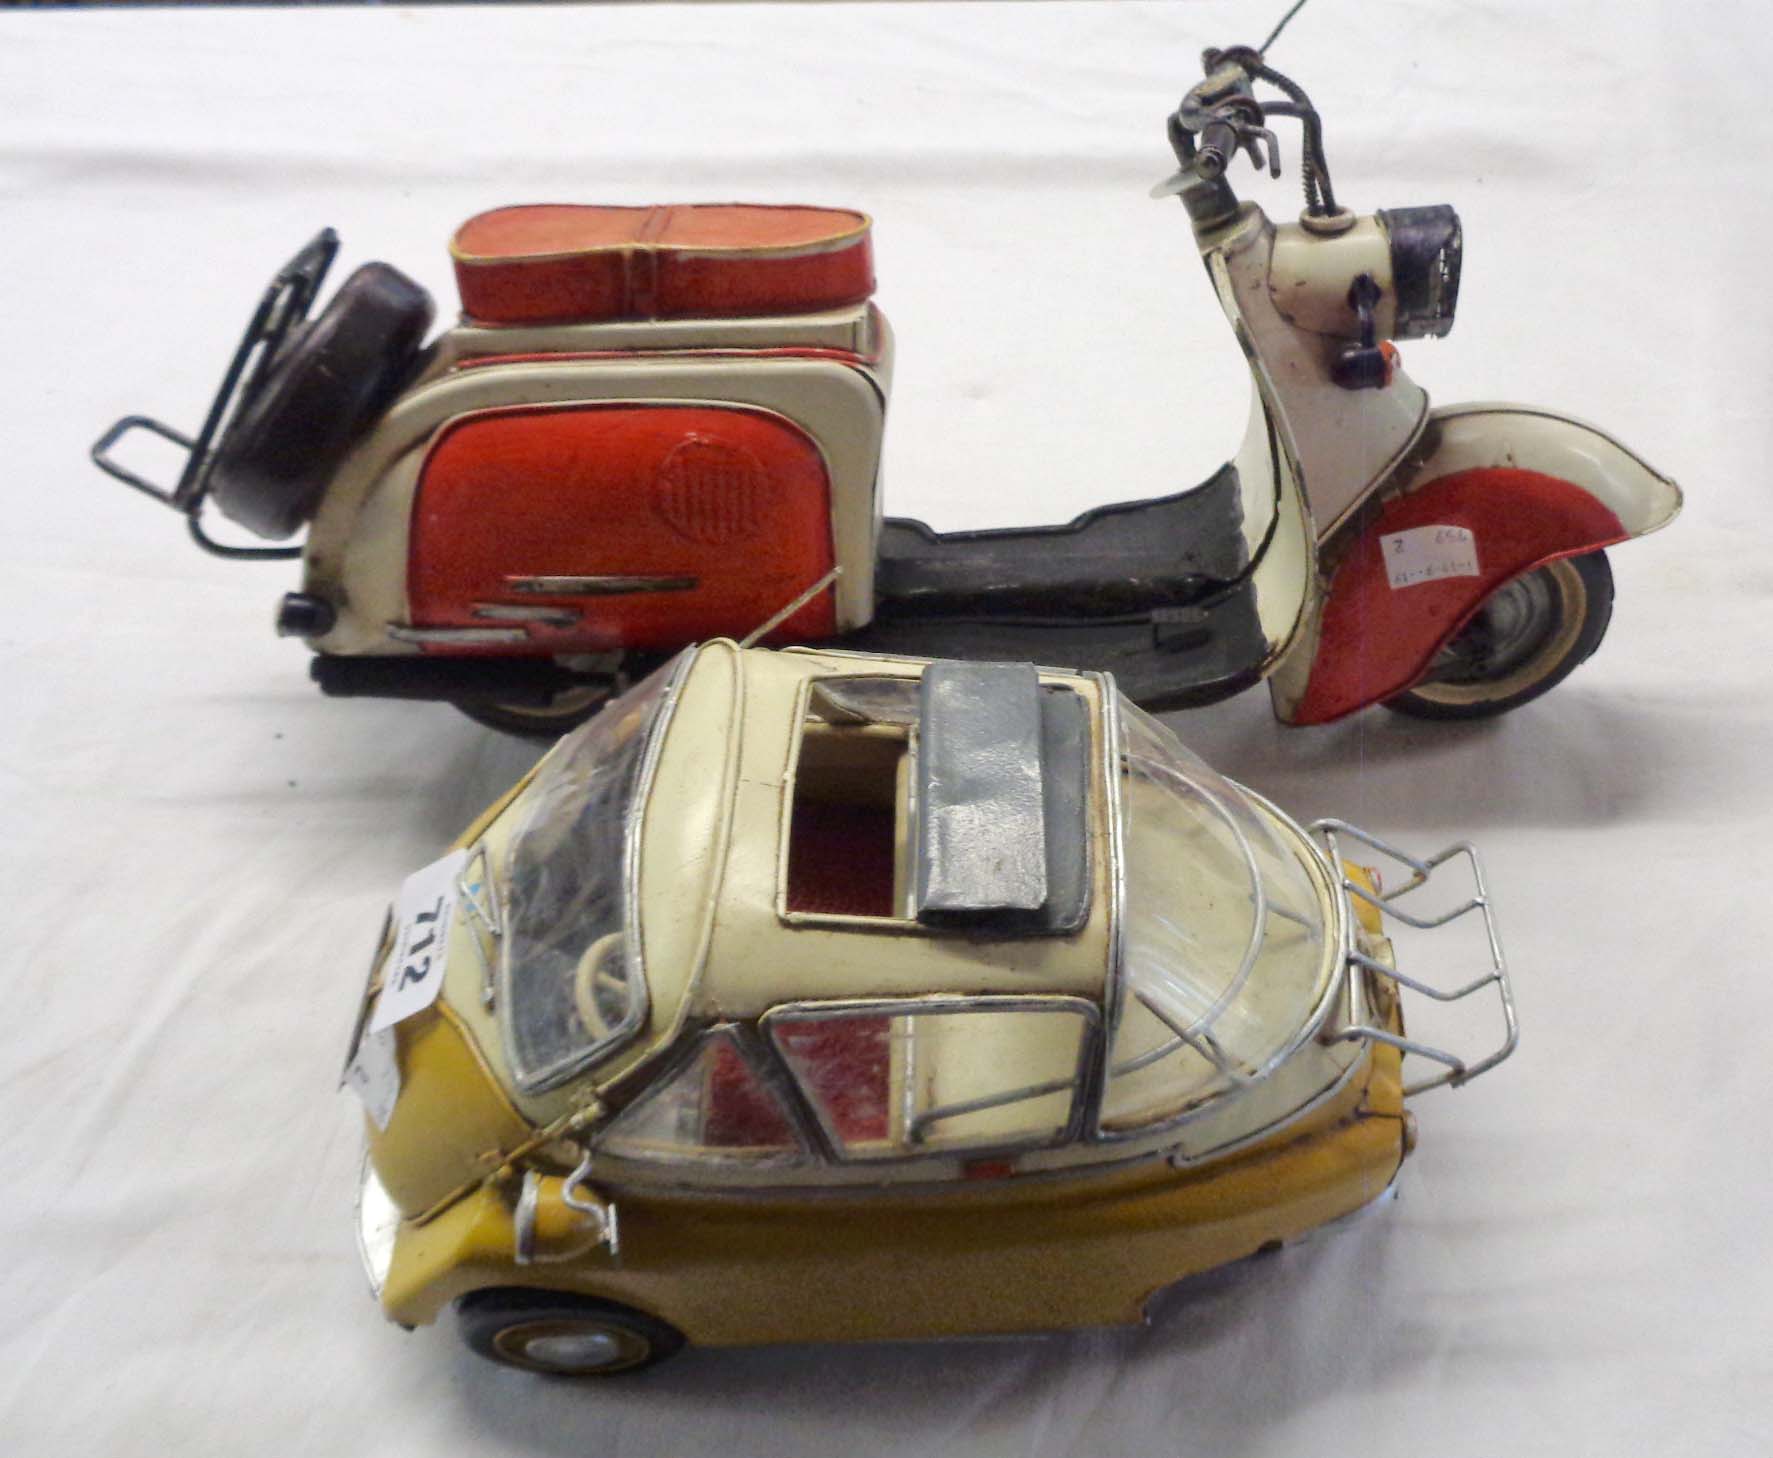 A modern painted tinplate model bubble car and similar scooter